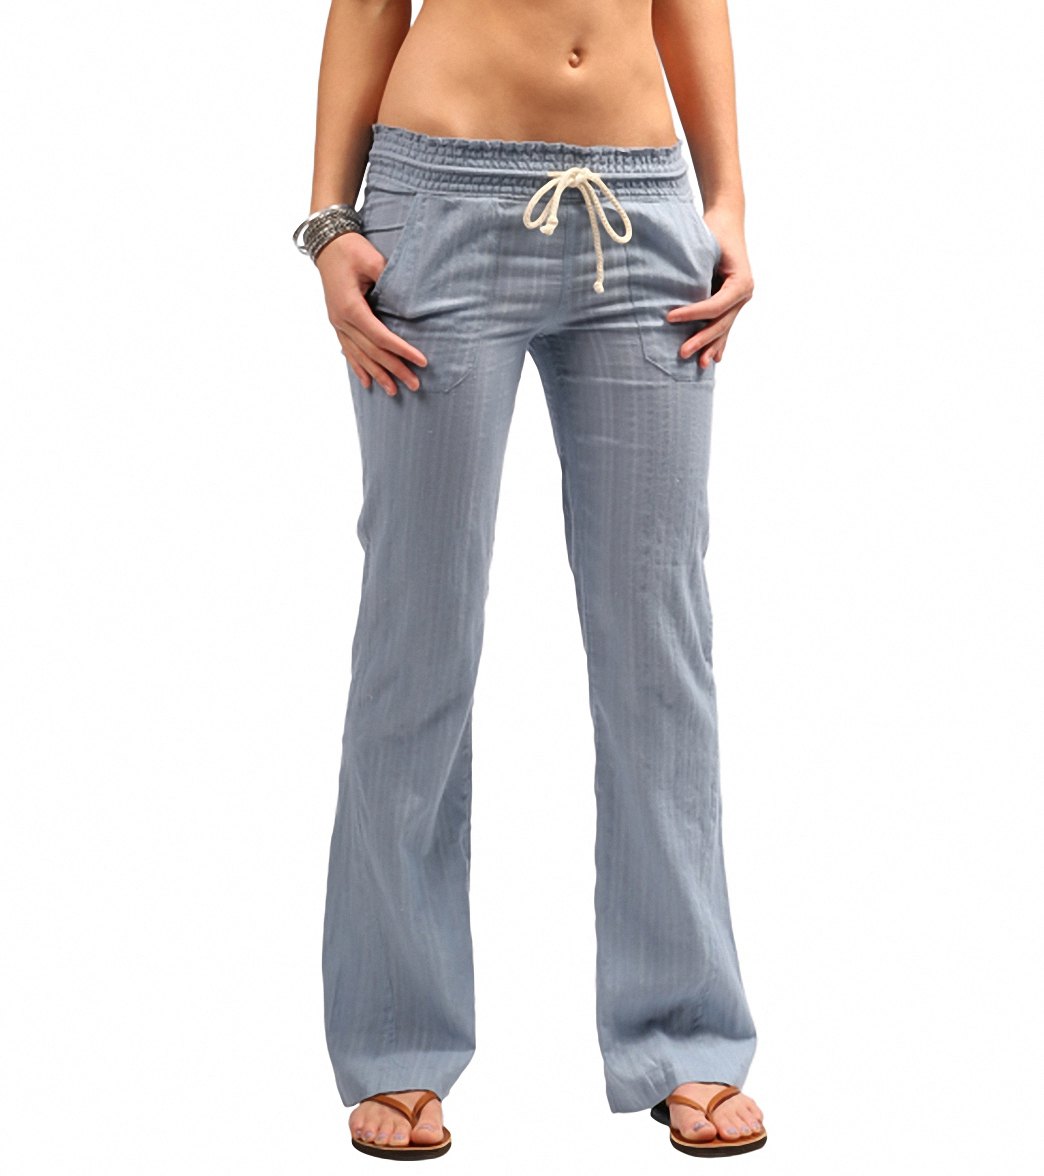 Roxy Oceanside Dobby Pant at SwimOutlet.com